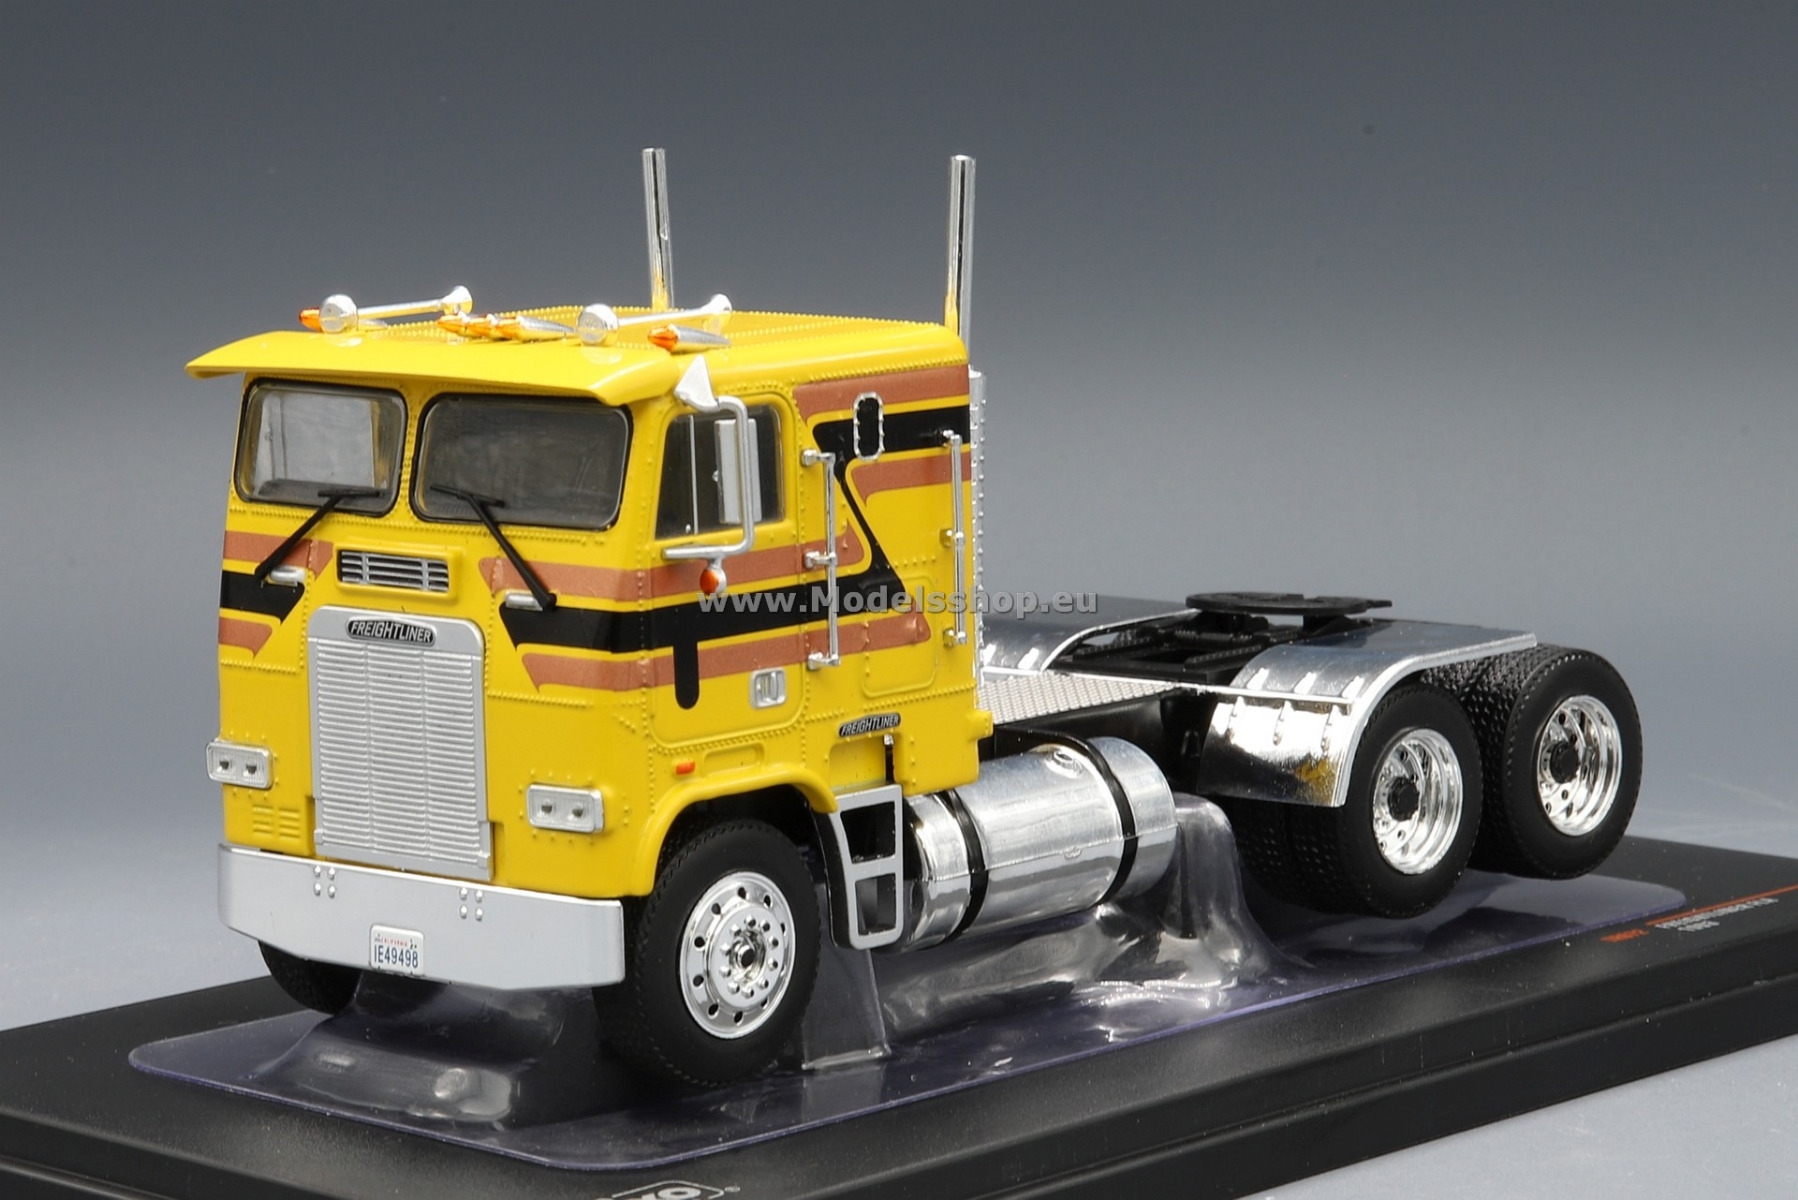 Freightliner FLA tractor truck, 1993 /yellow - decorated/